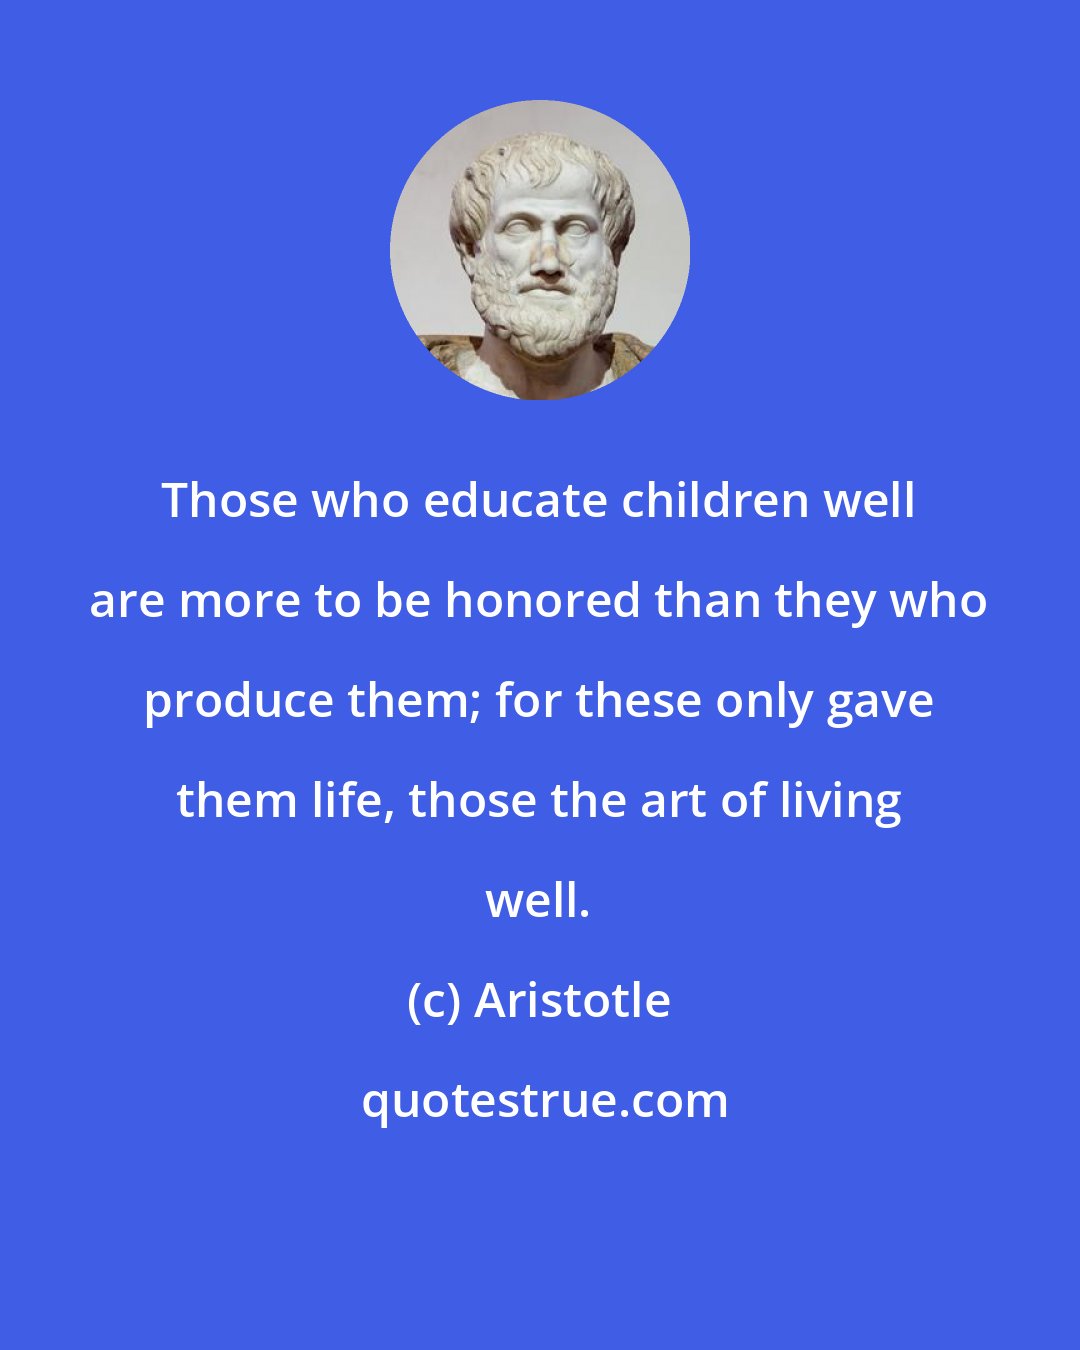 Aristotle: Those who educate children well are more to be honored than they who produce them; for these only gave them life, those the art of living well.